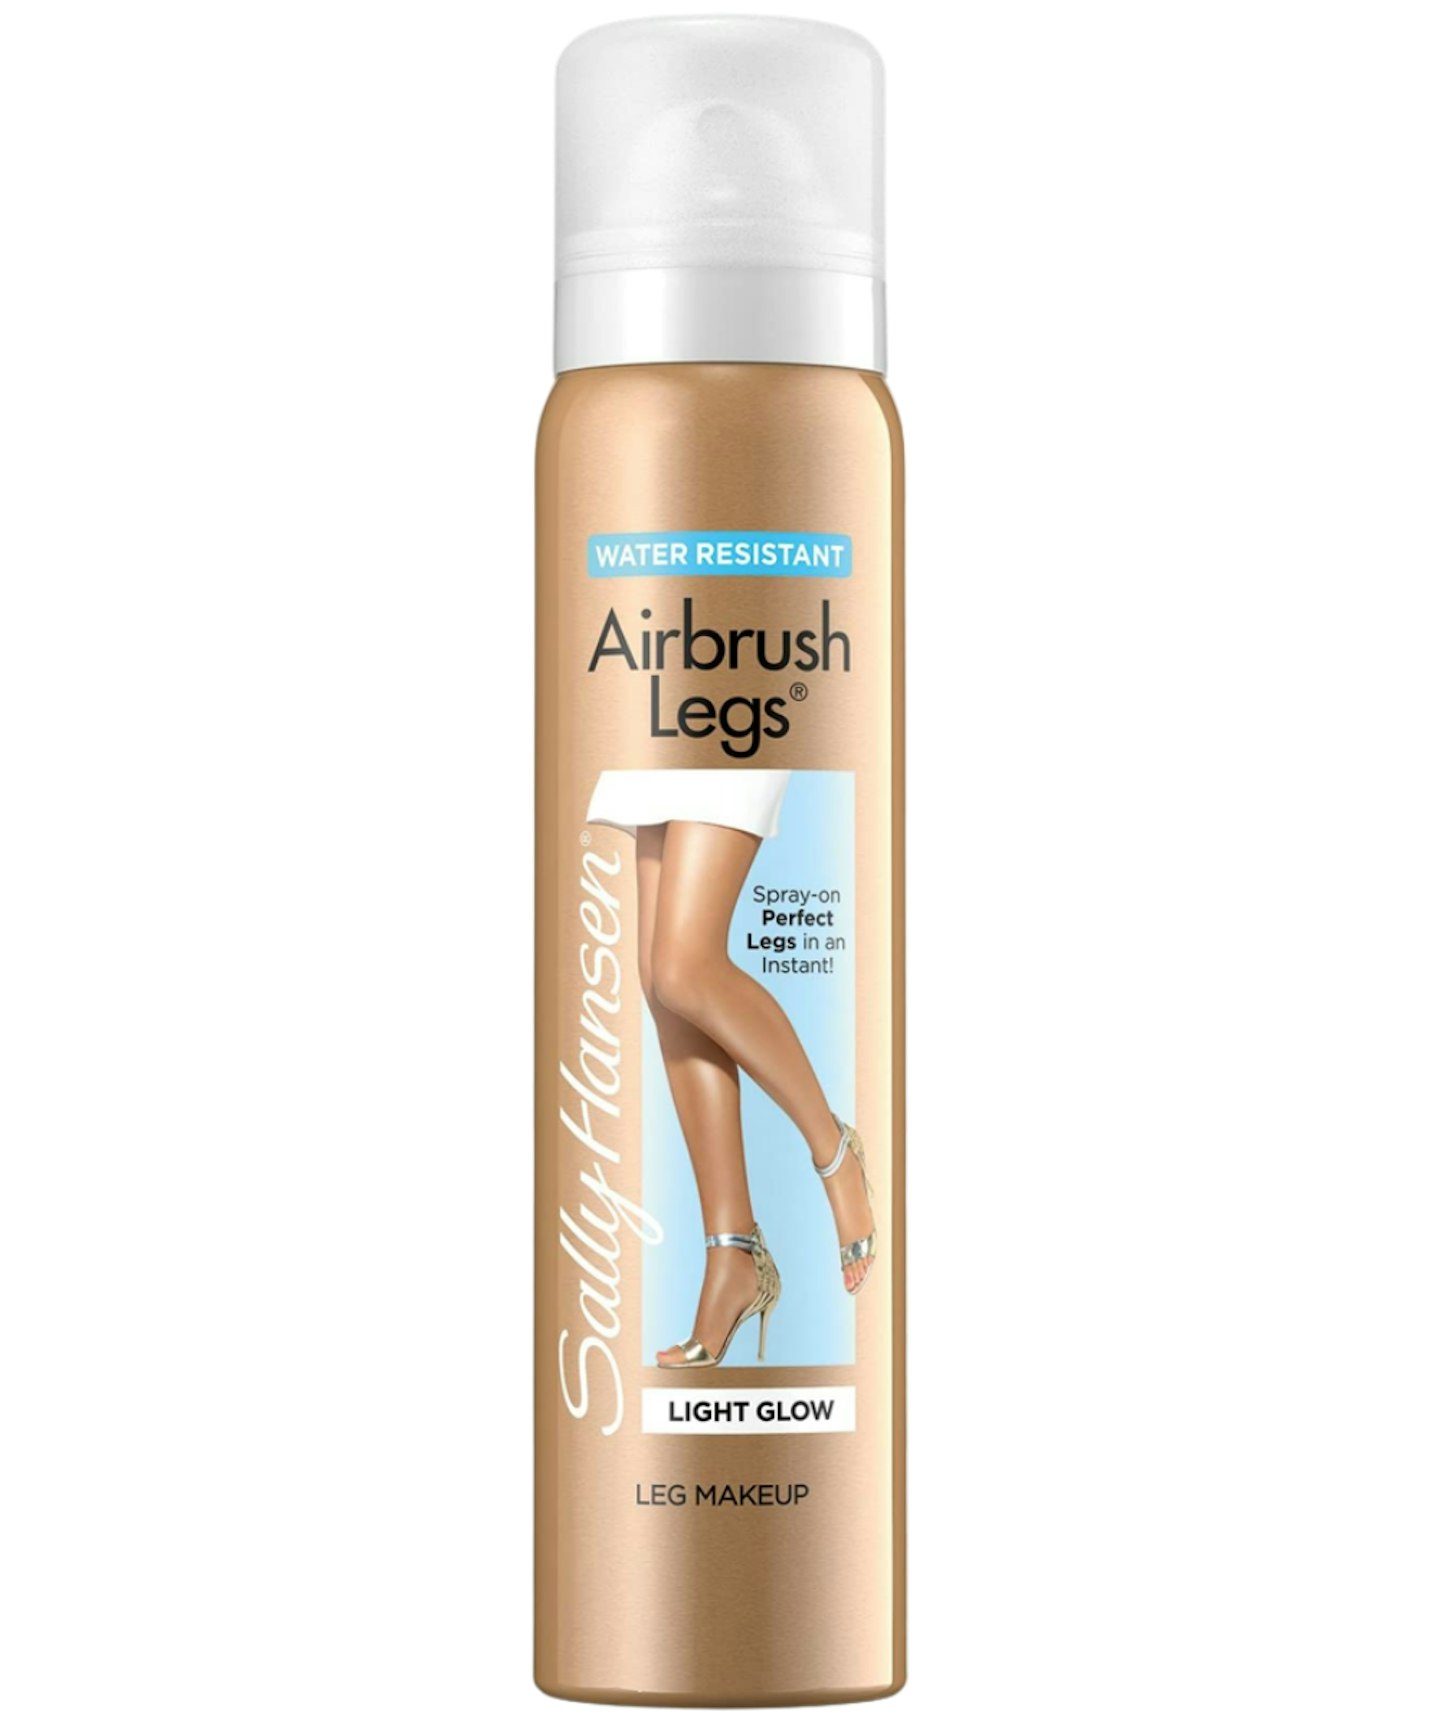 A picture of the Airbrush Legs product by Sally Hansen as mentioned in this article.